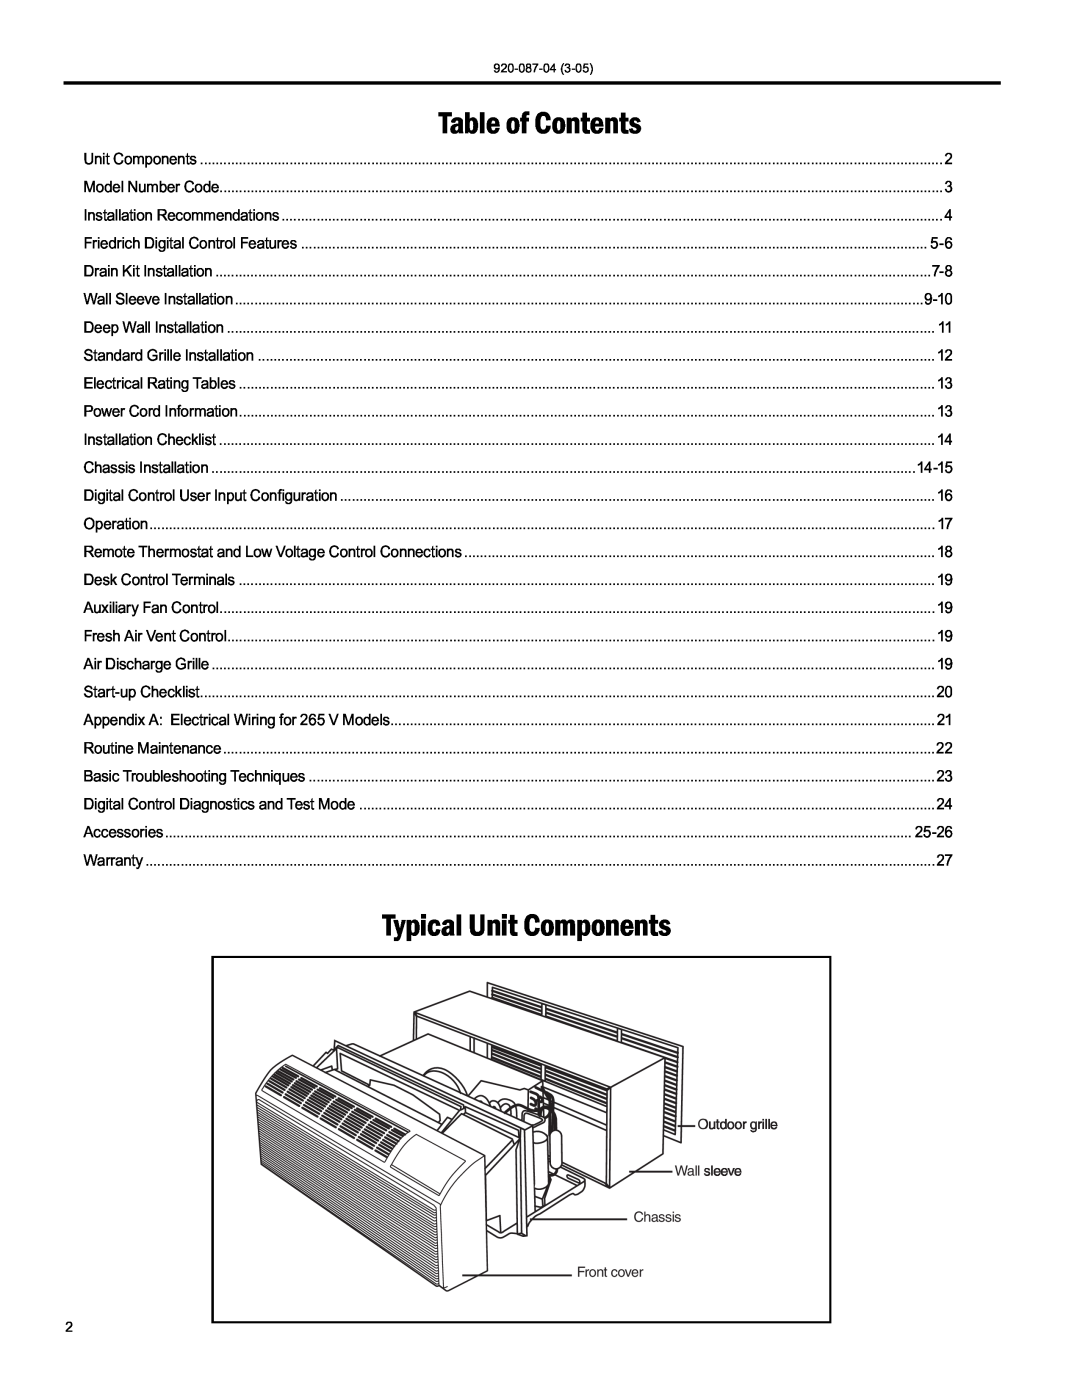 Friedrich 920-087-04 (3-05) Table of Contents, Typical Unit Components, Outdoor grille Wall sleeve Chassis Front cover 